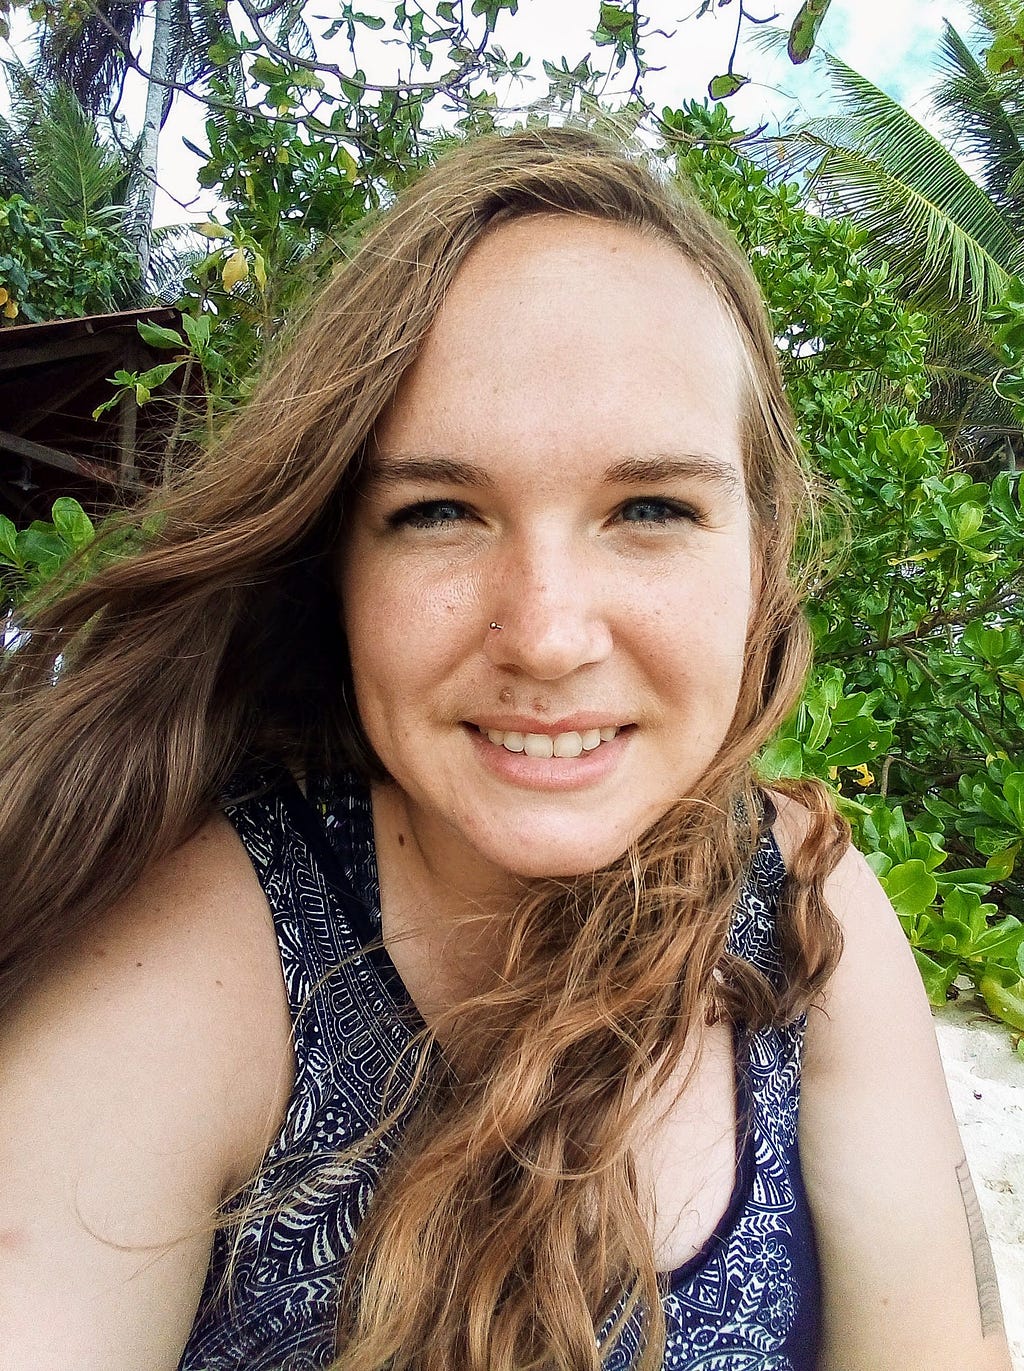 A portrait of Heidi Stewart smiling on a beach with foliage in the background.